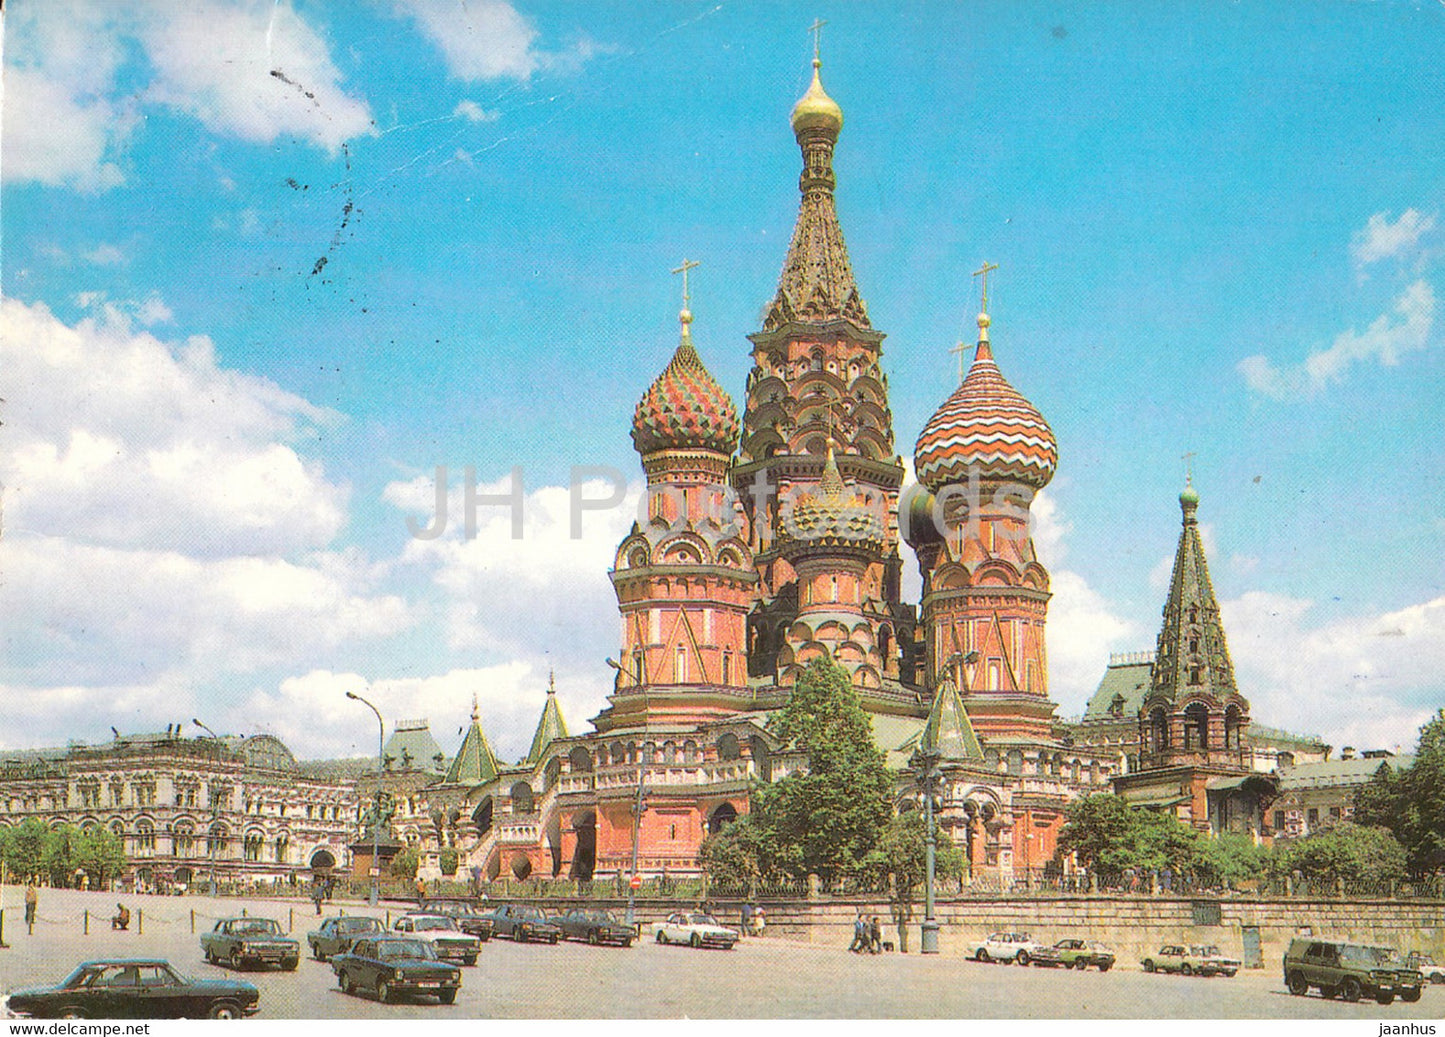 Moscow - Pokrovsky Cathedral - St. Basil's Cathedral - car Volga - 2 - postal stationery - 1986 - Russia USSR - used - JH Postcards